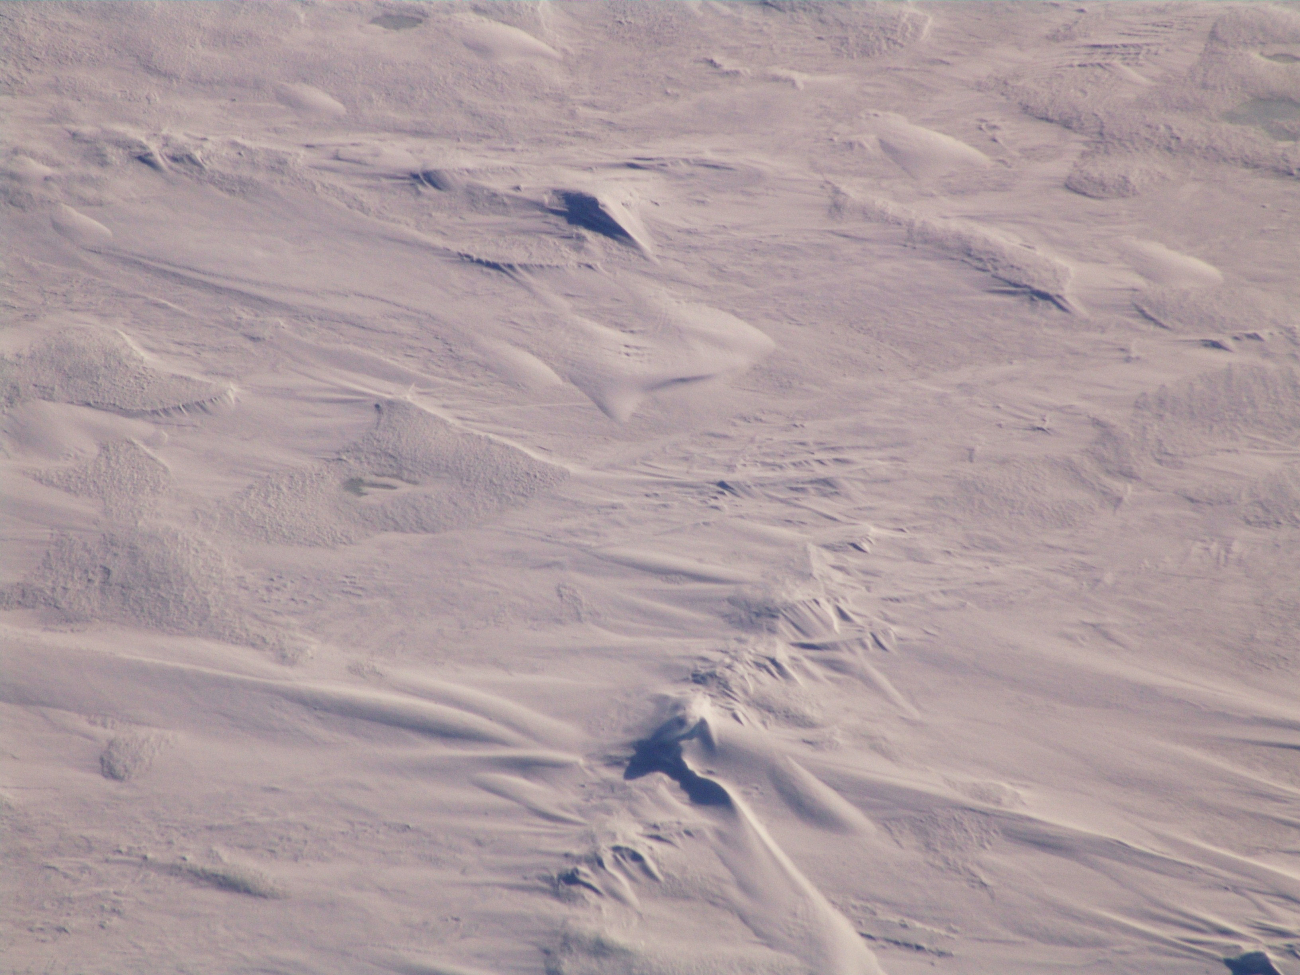 Hummocky ice, remnants of ridges, and various wind, water, and freezingpatterns captured in the surface expression of  multi-year ice